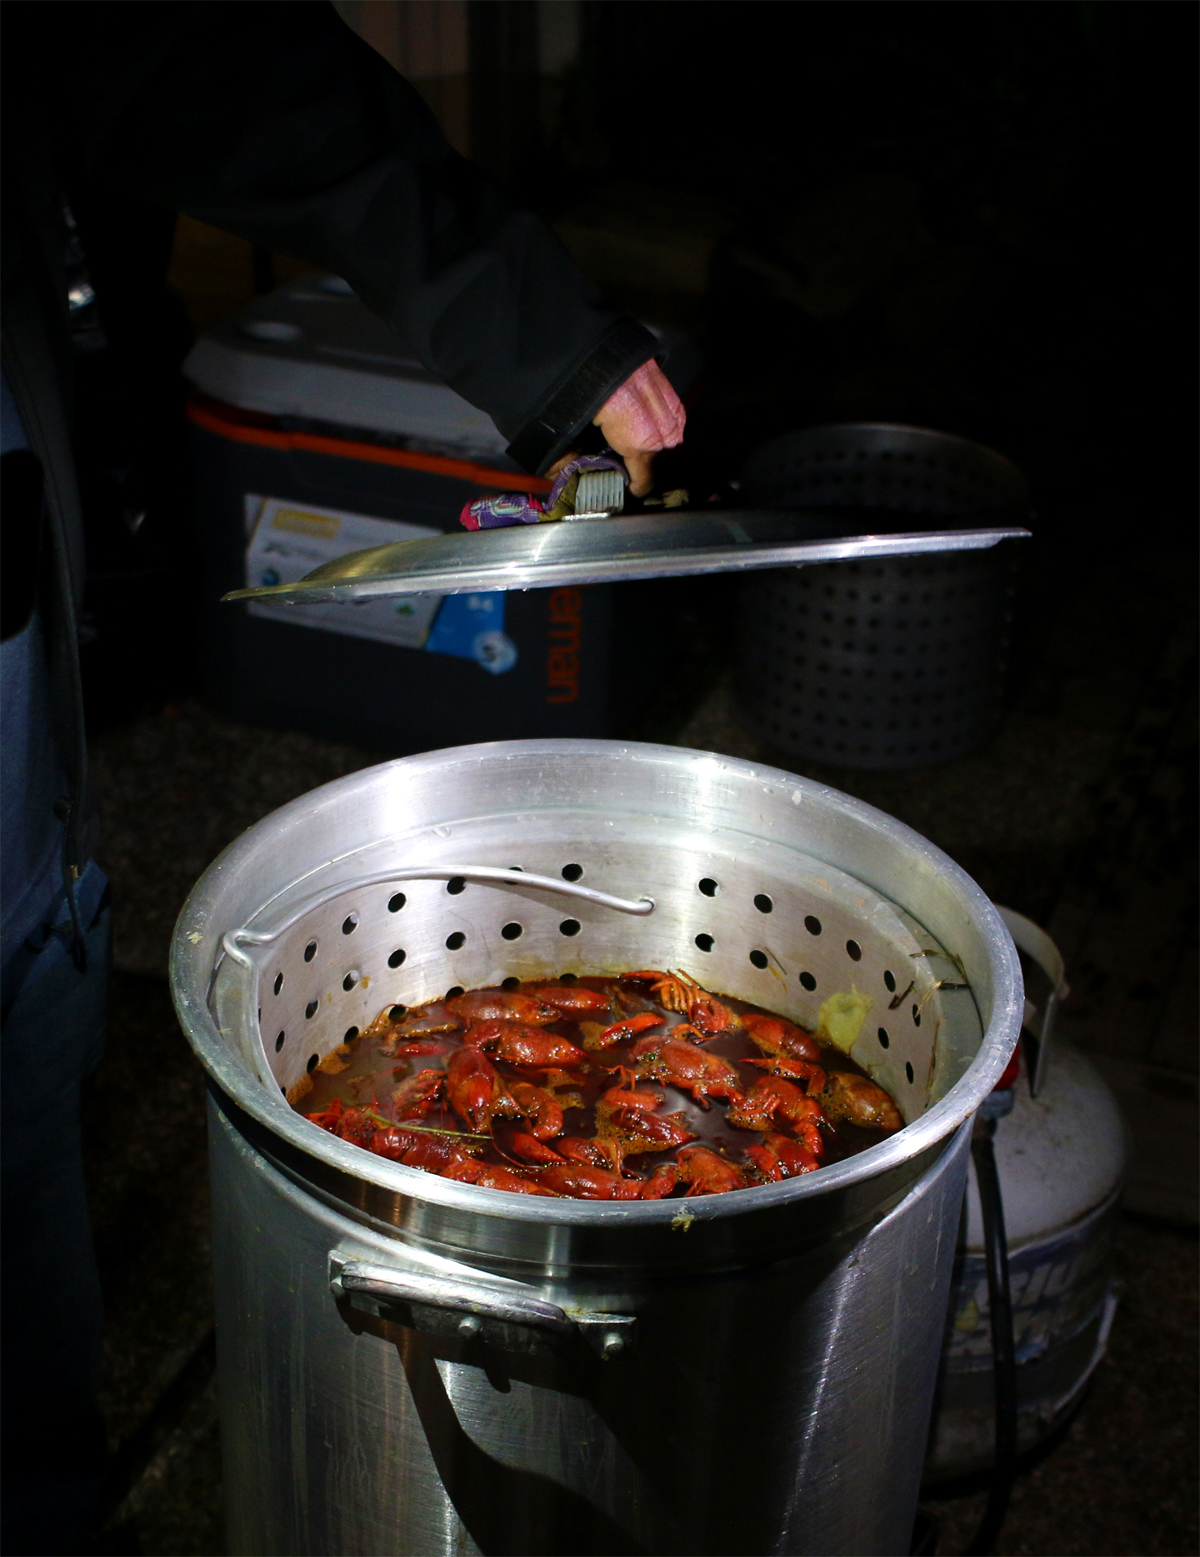 A photo of a pot of boiling crawfish